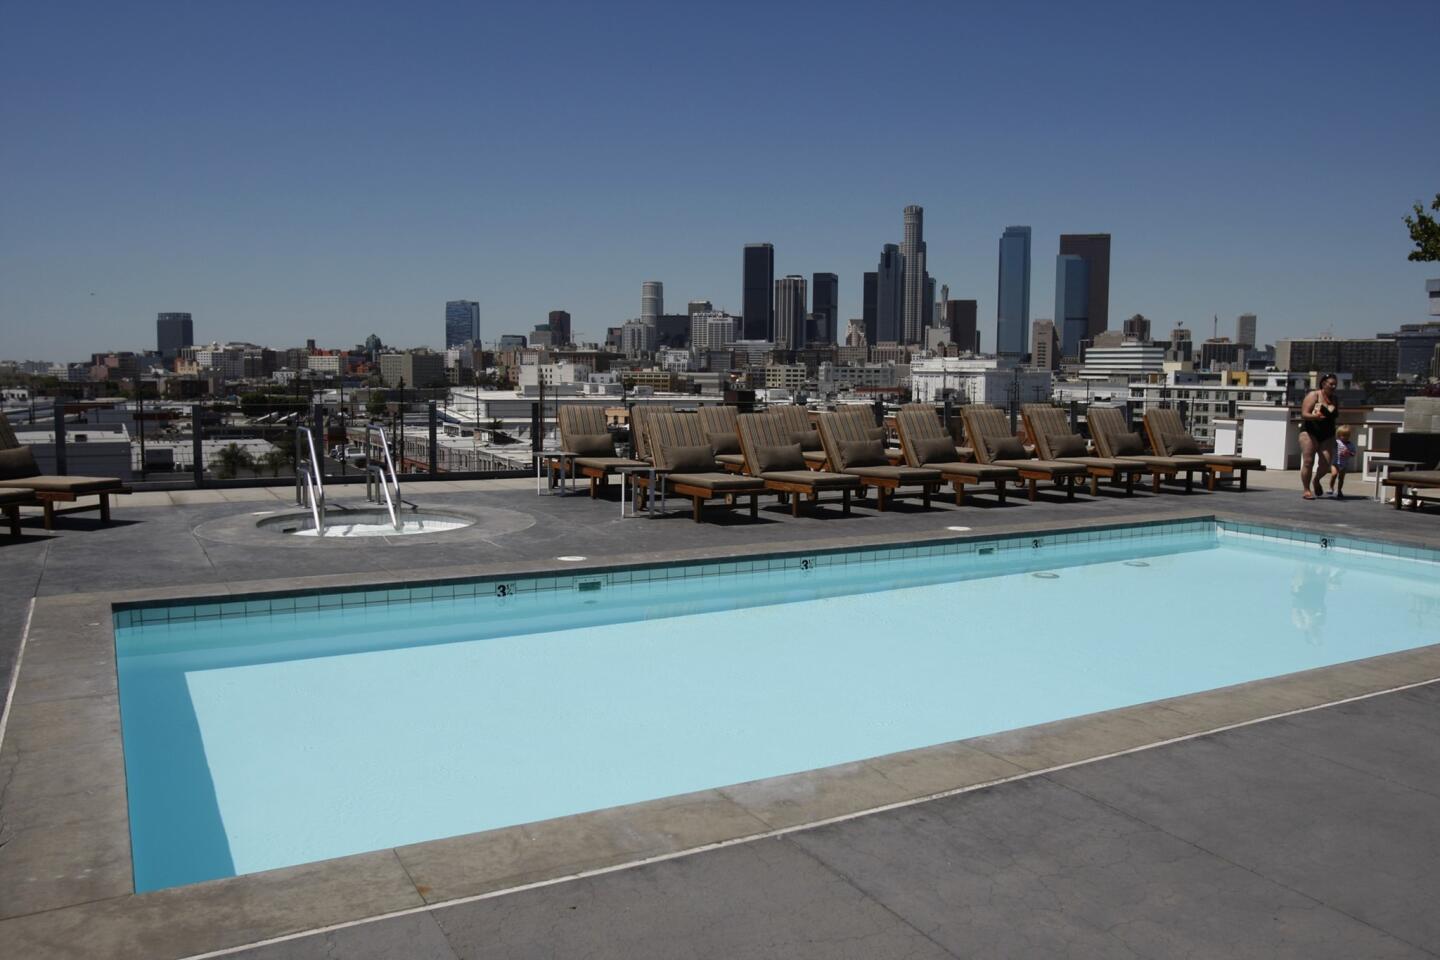 The swimming pool at Barker Block, a downtown condominium complex, is located on the roof.